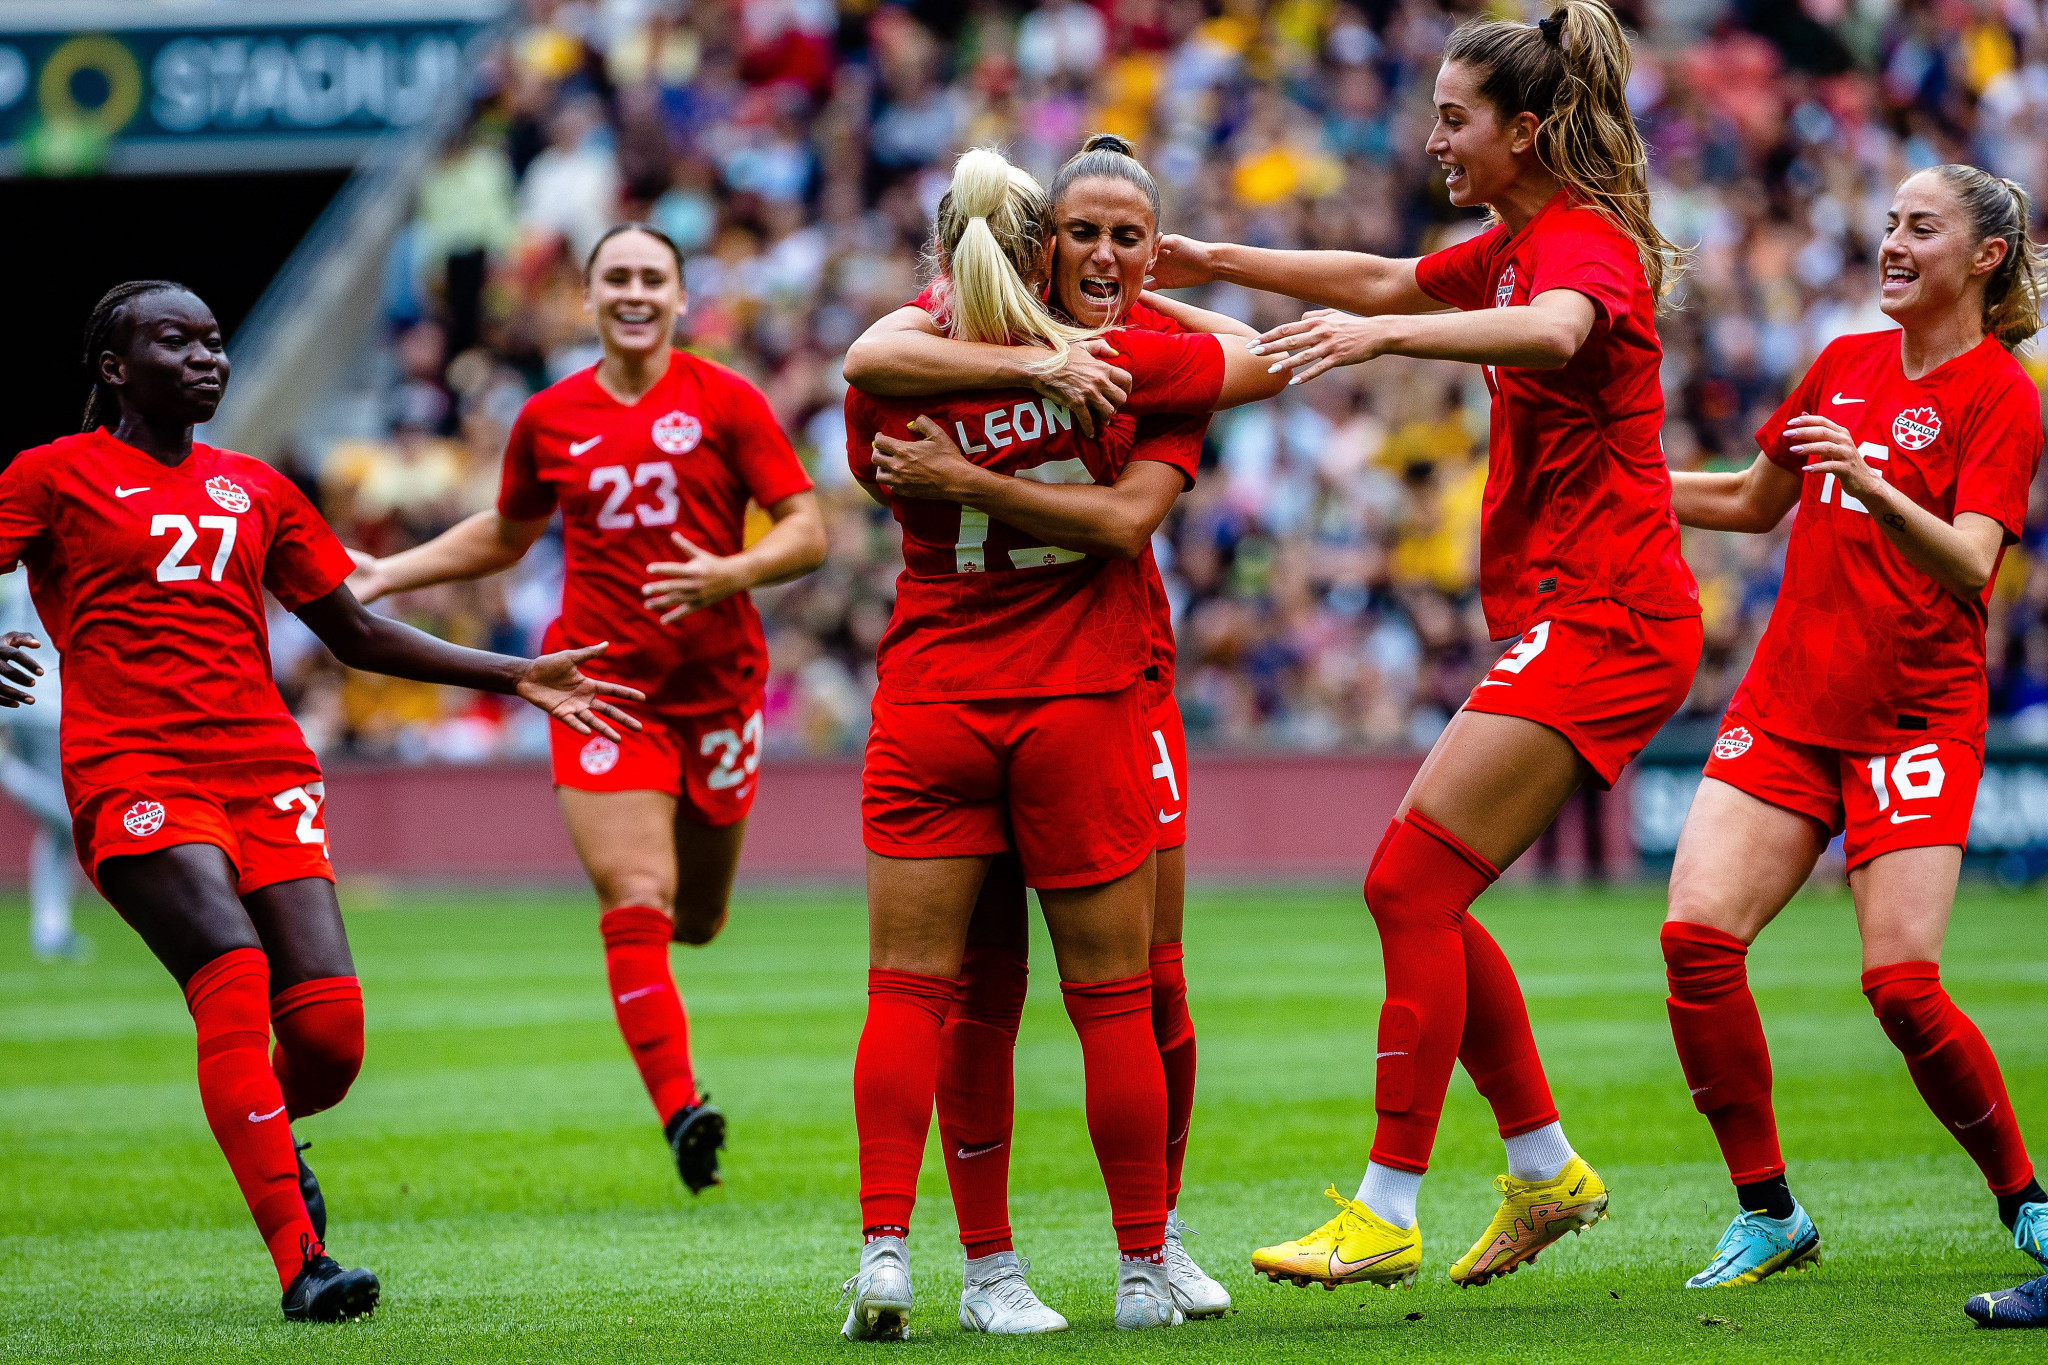 Canada's women's football team ends strike after threatened with legal action